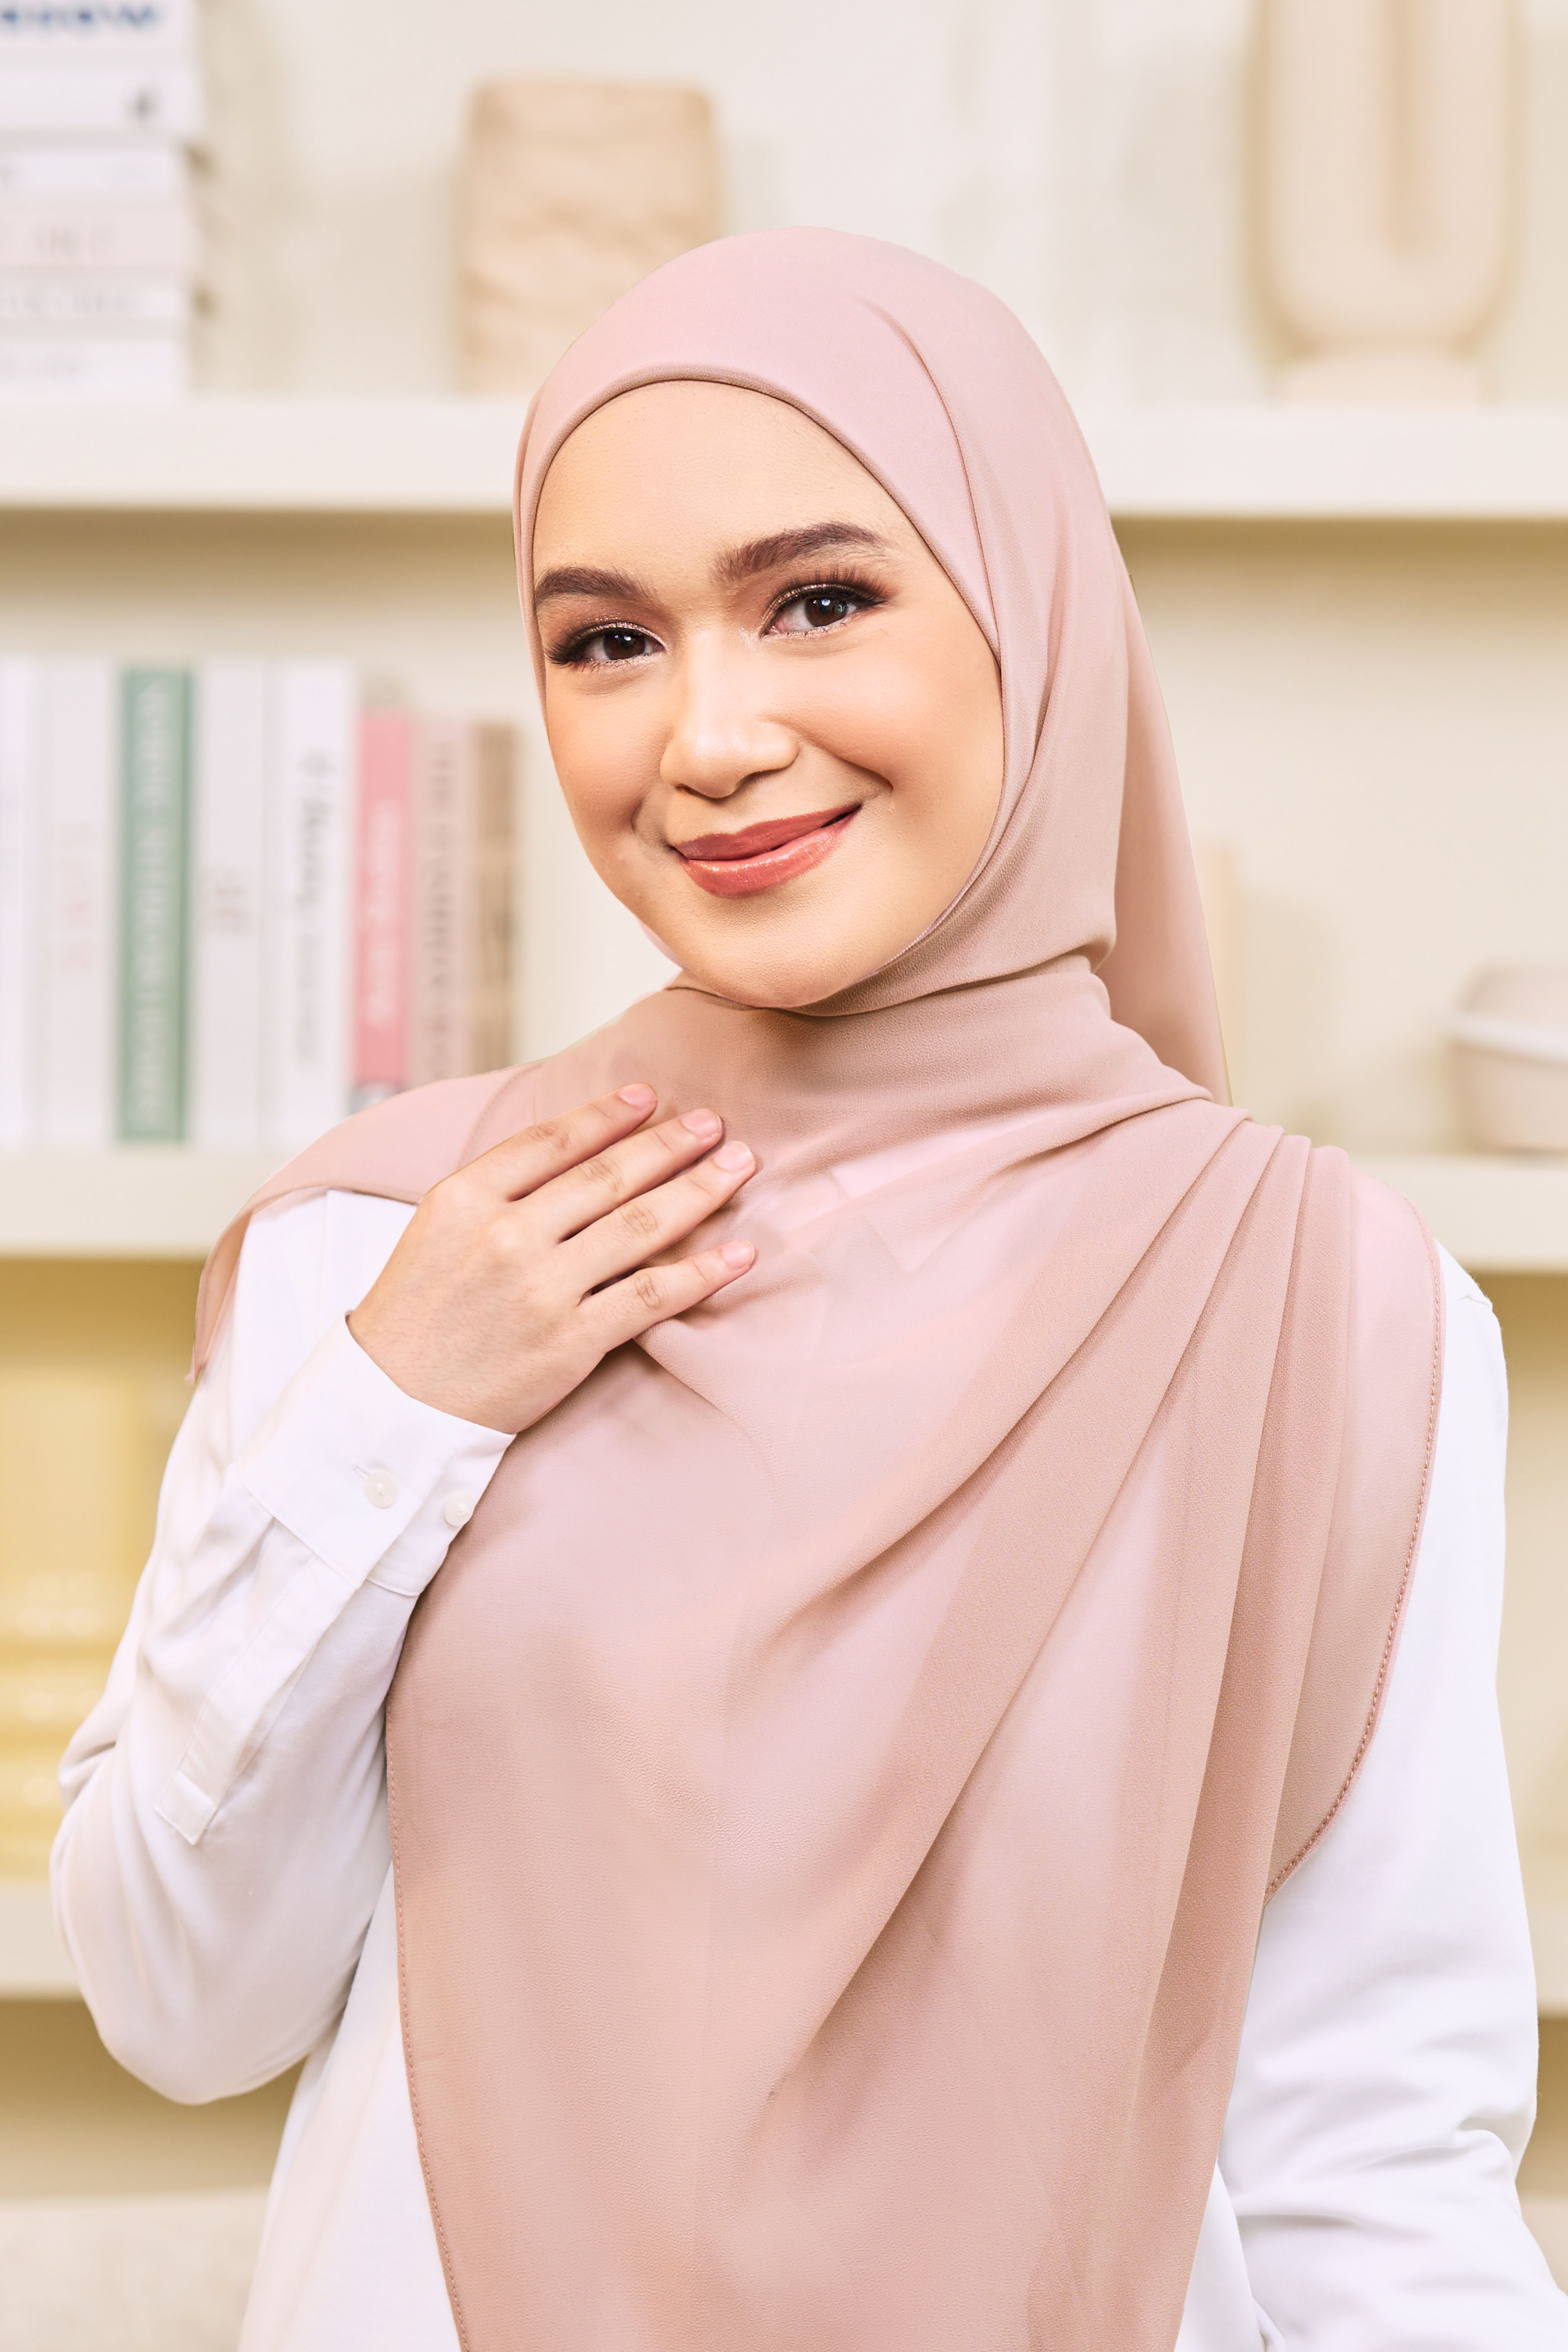 ADINA Instant Shawl with attached in Rosy Brown